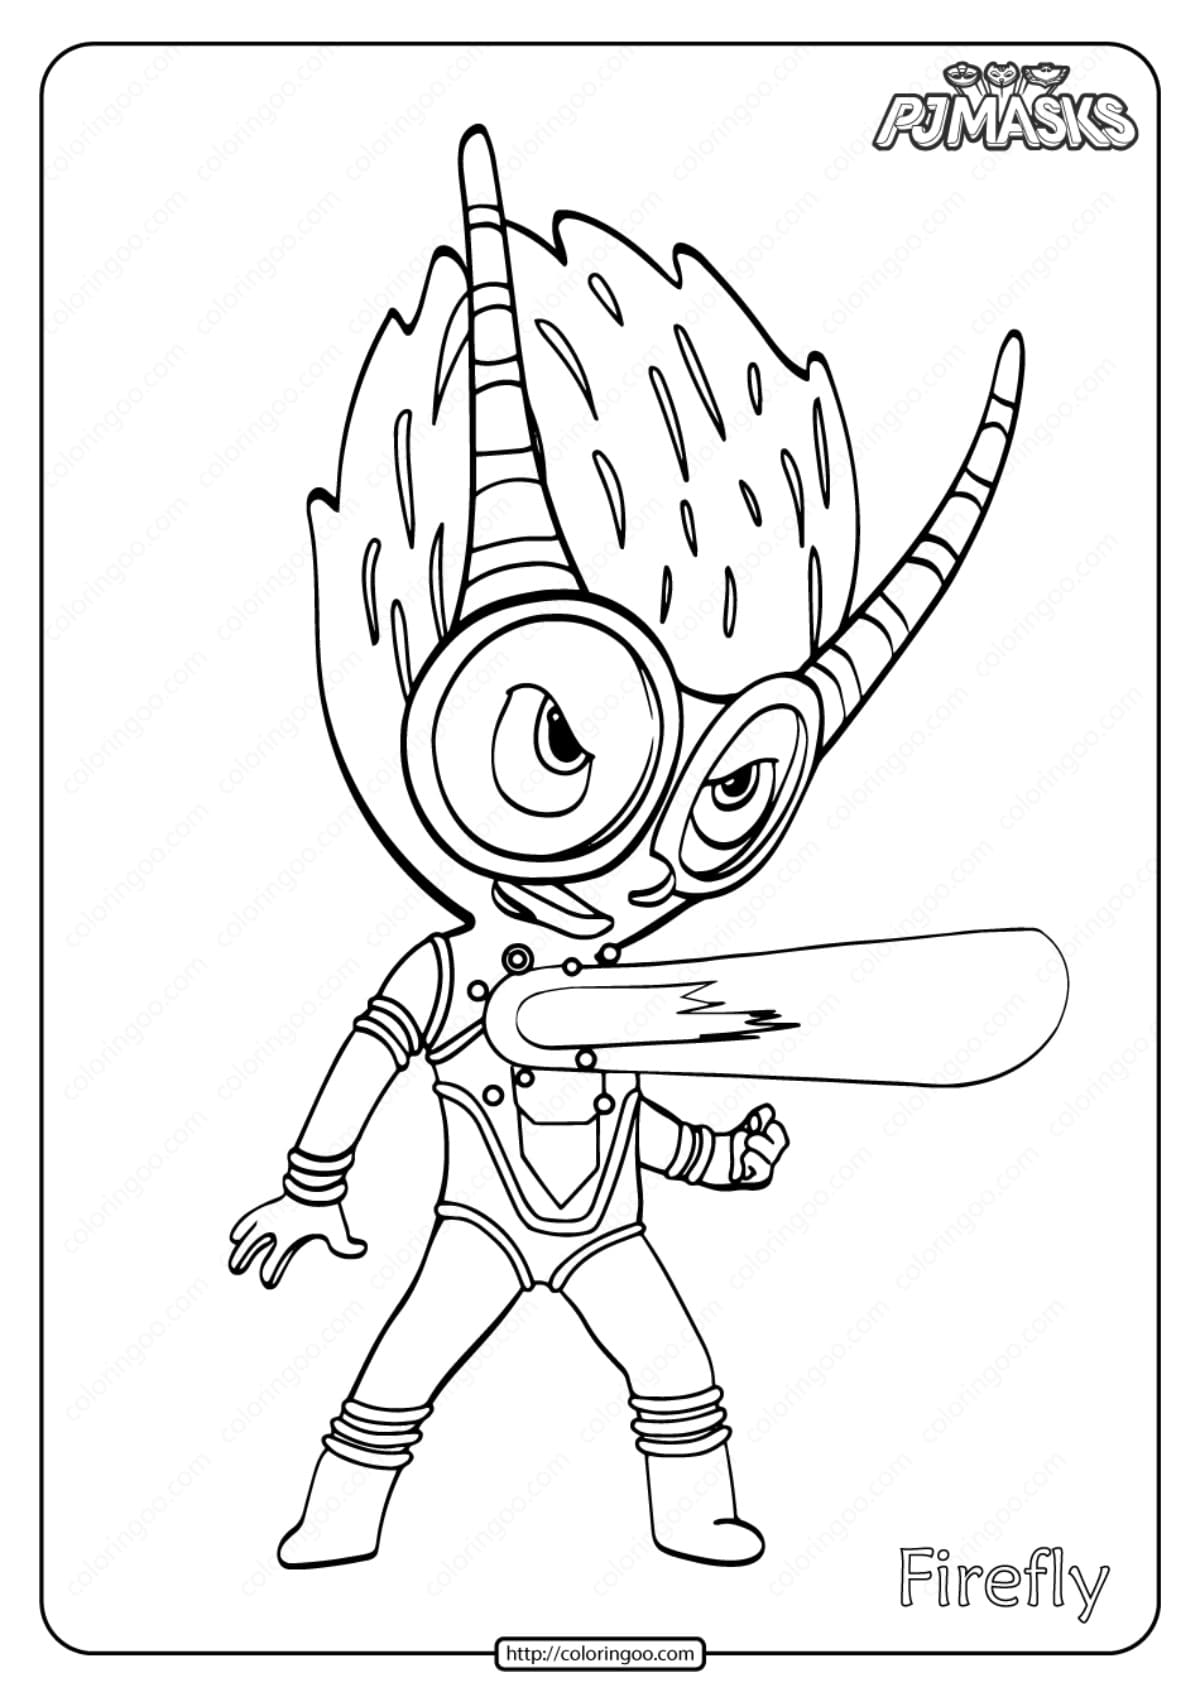 Cartoon Firefly Free Coloring Page